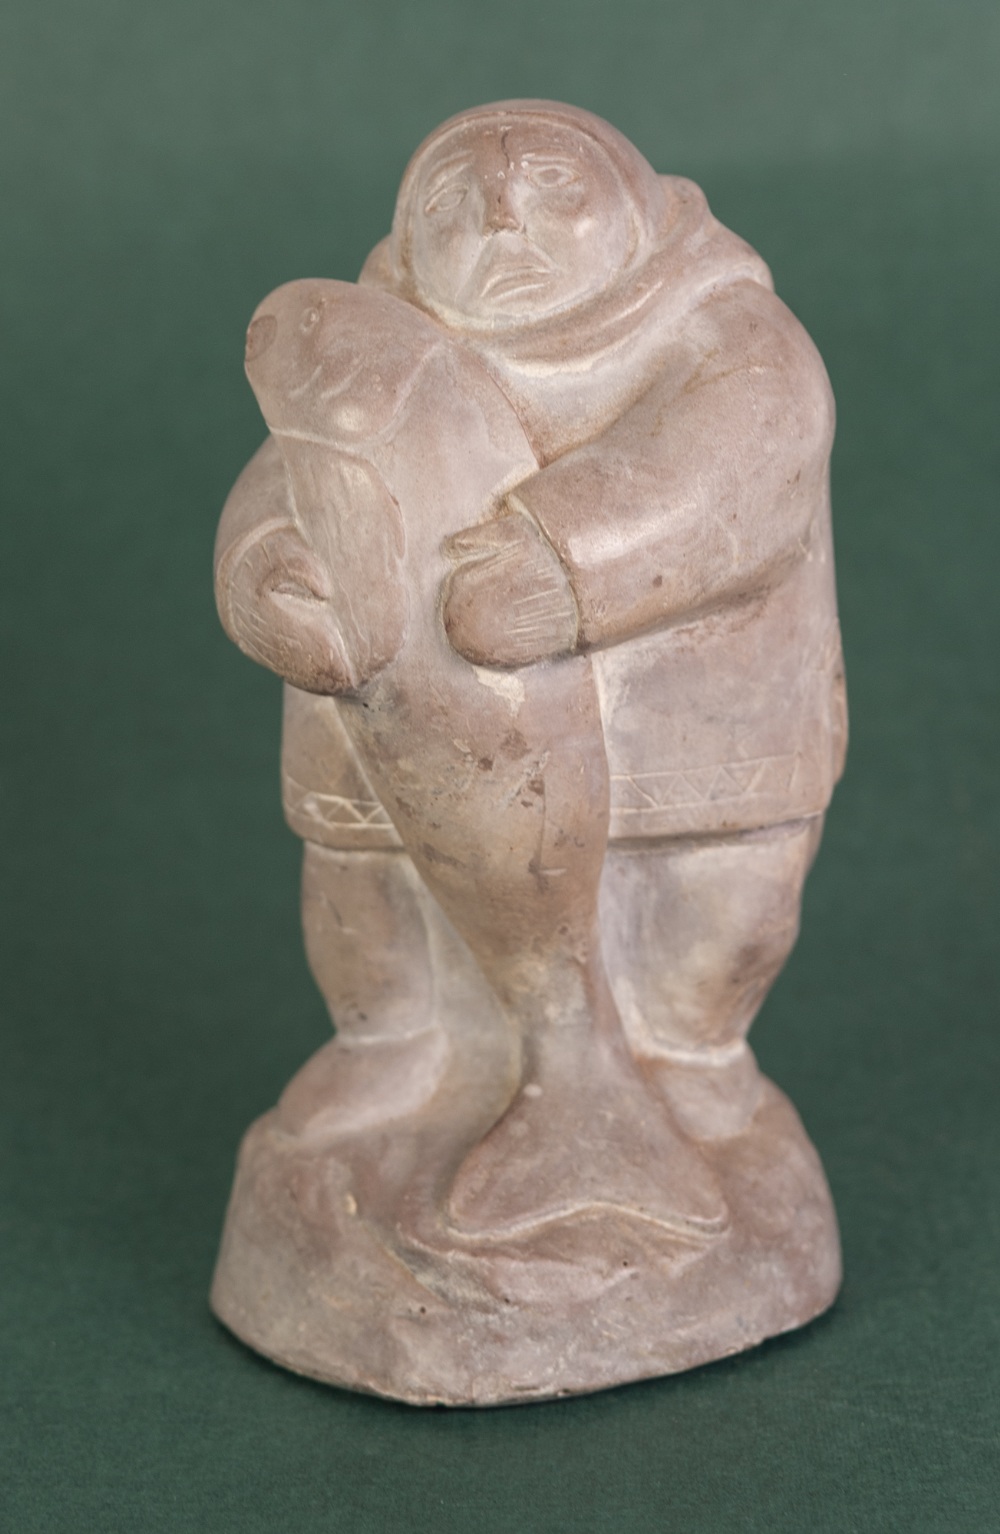 A CANADIAN INUIT STONE CARVING of an Inuit holding a large fish, incised 'Abbott, Canada', 6 1/2" (